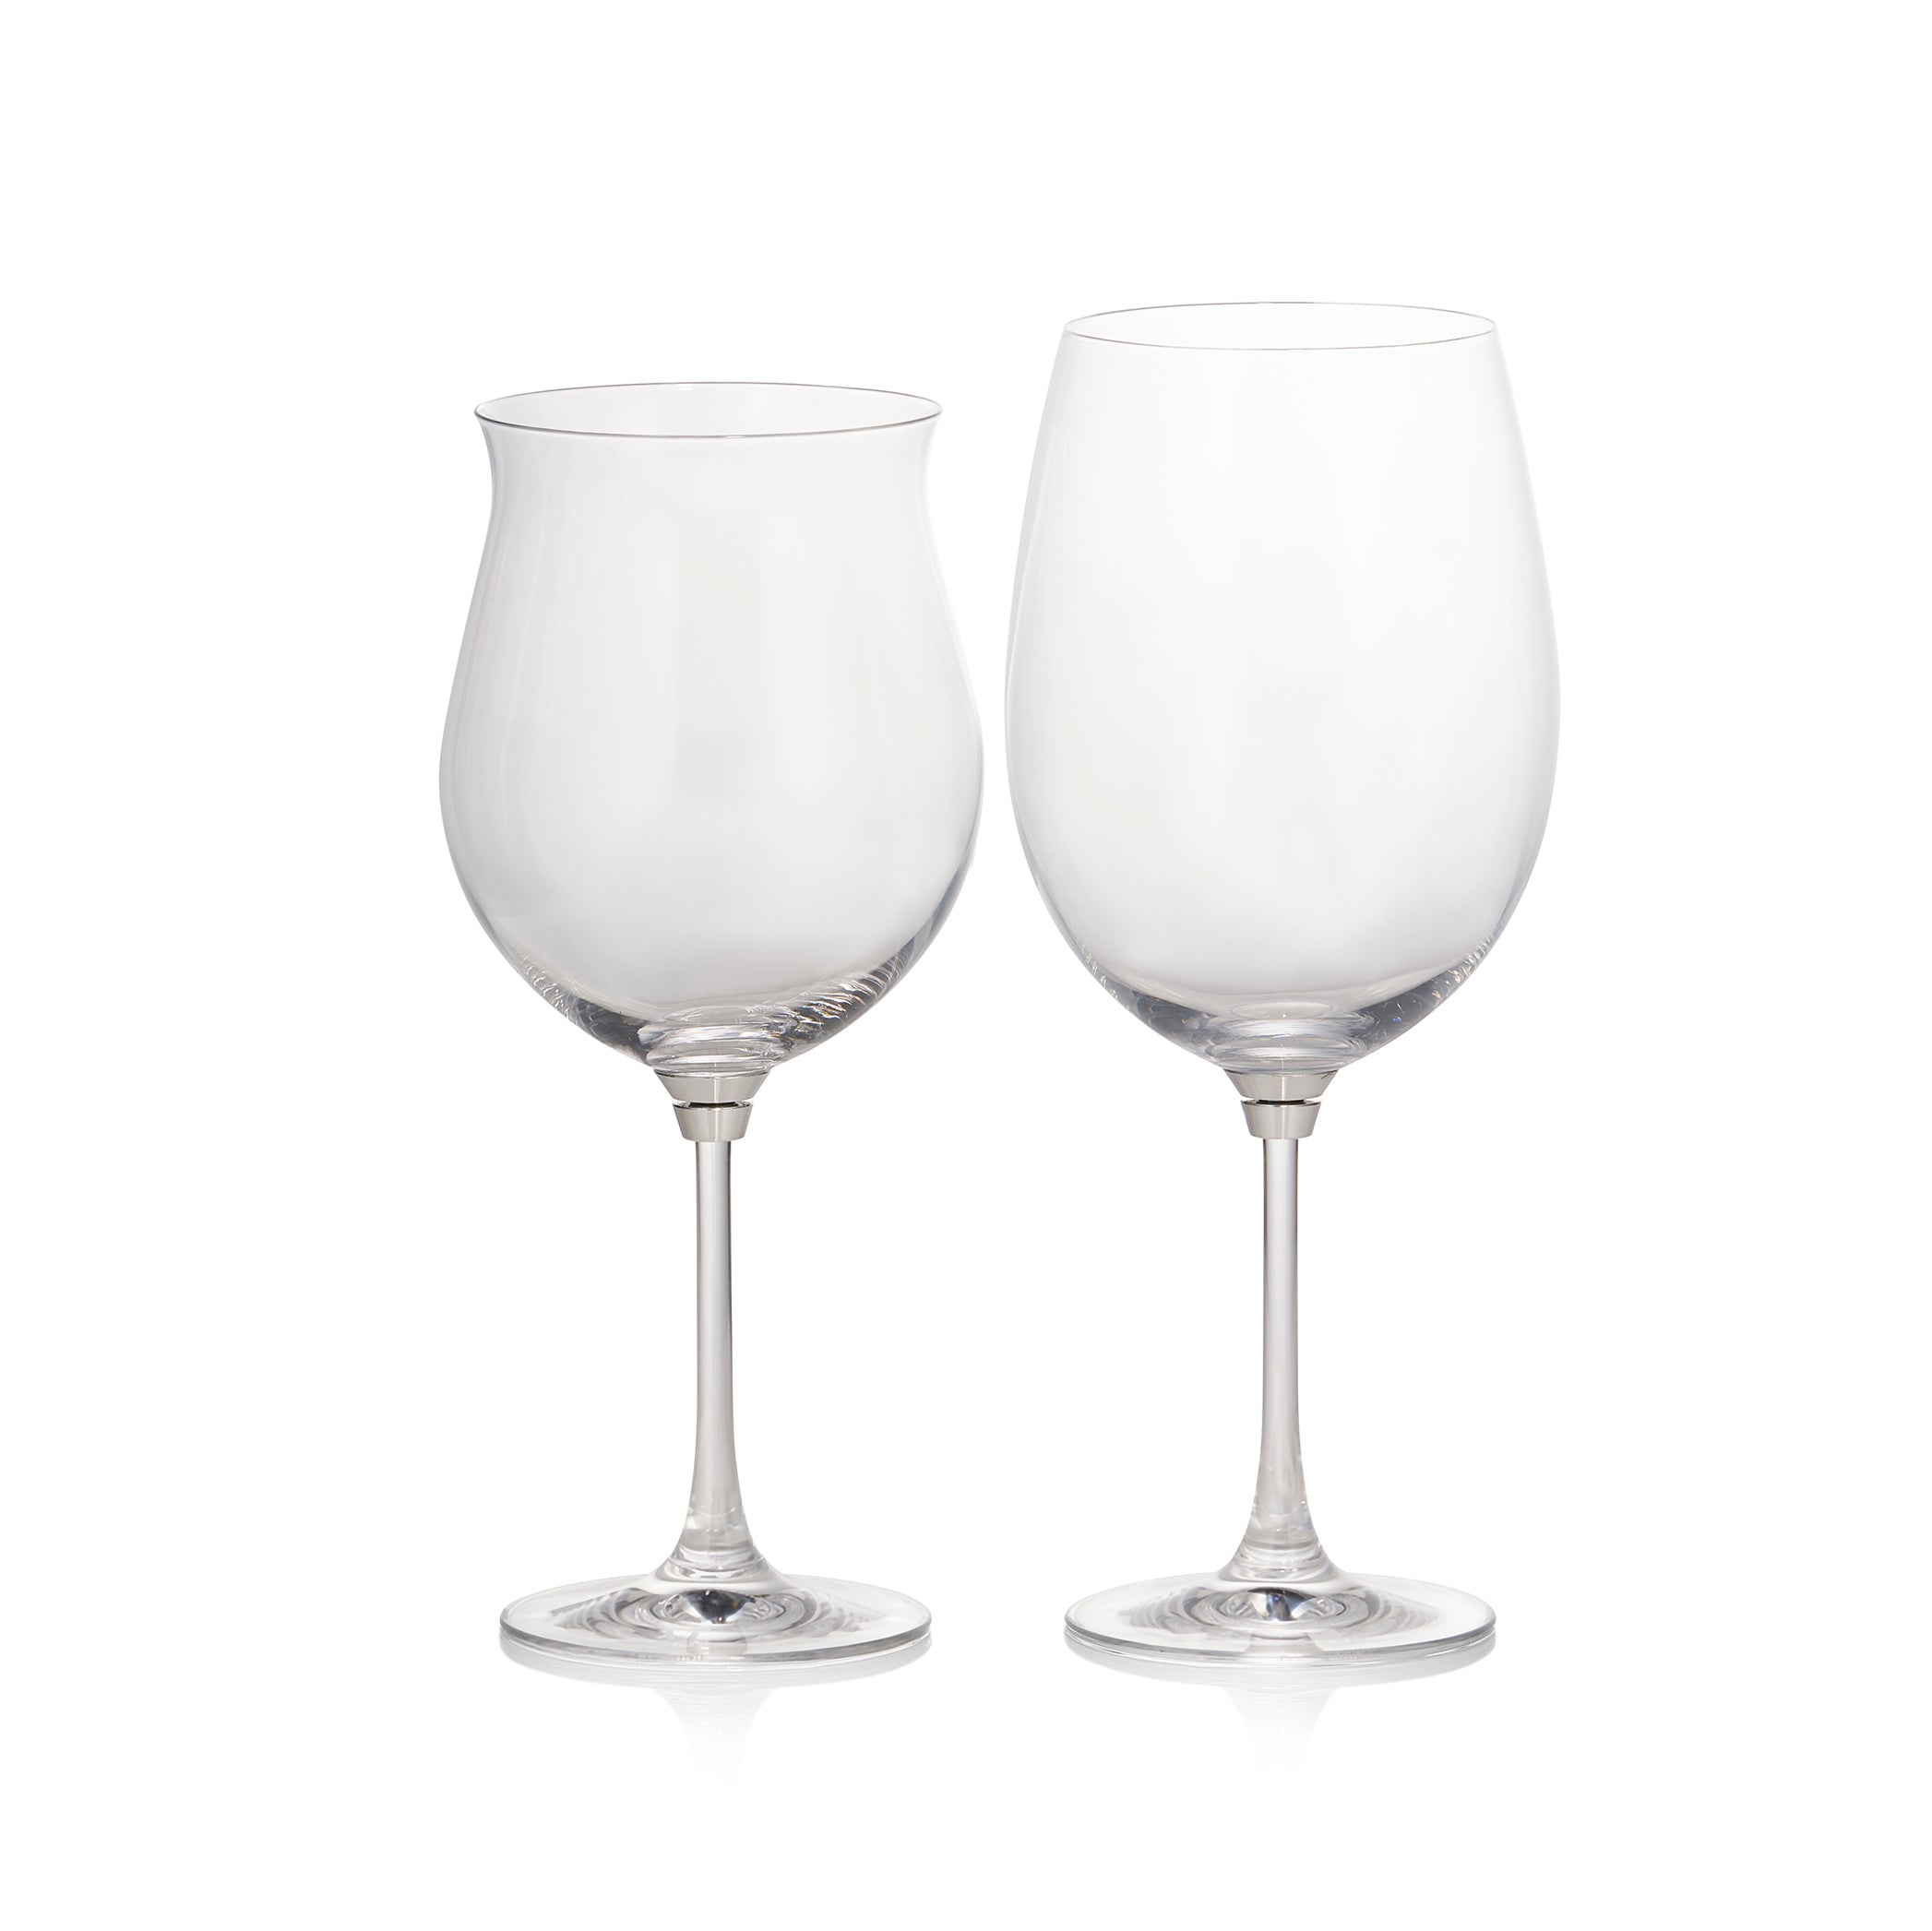 Set of Two Handblown Rotating Wine Tasting Glasses in Silver